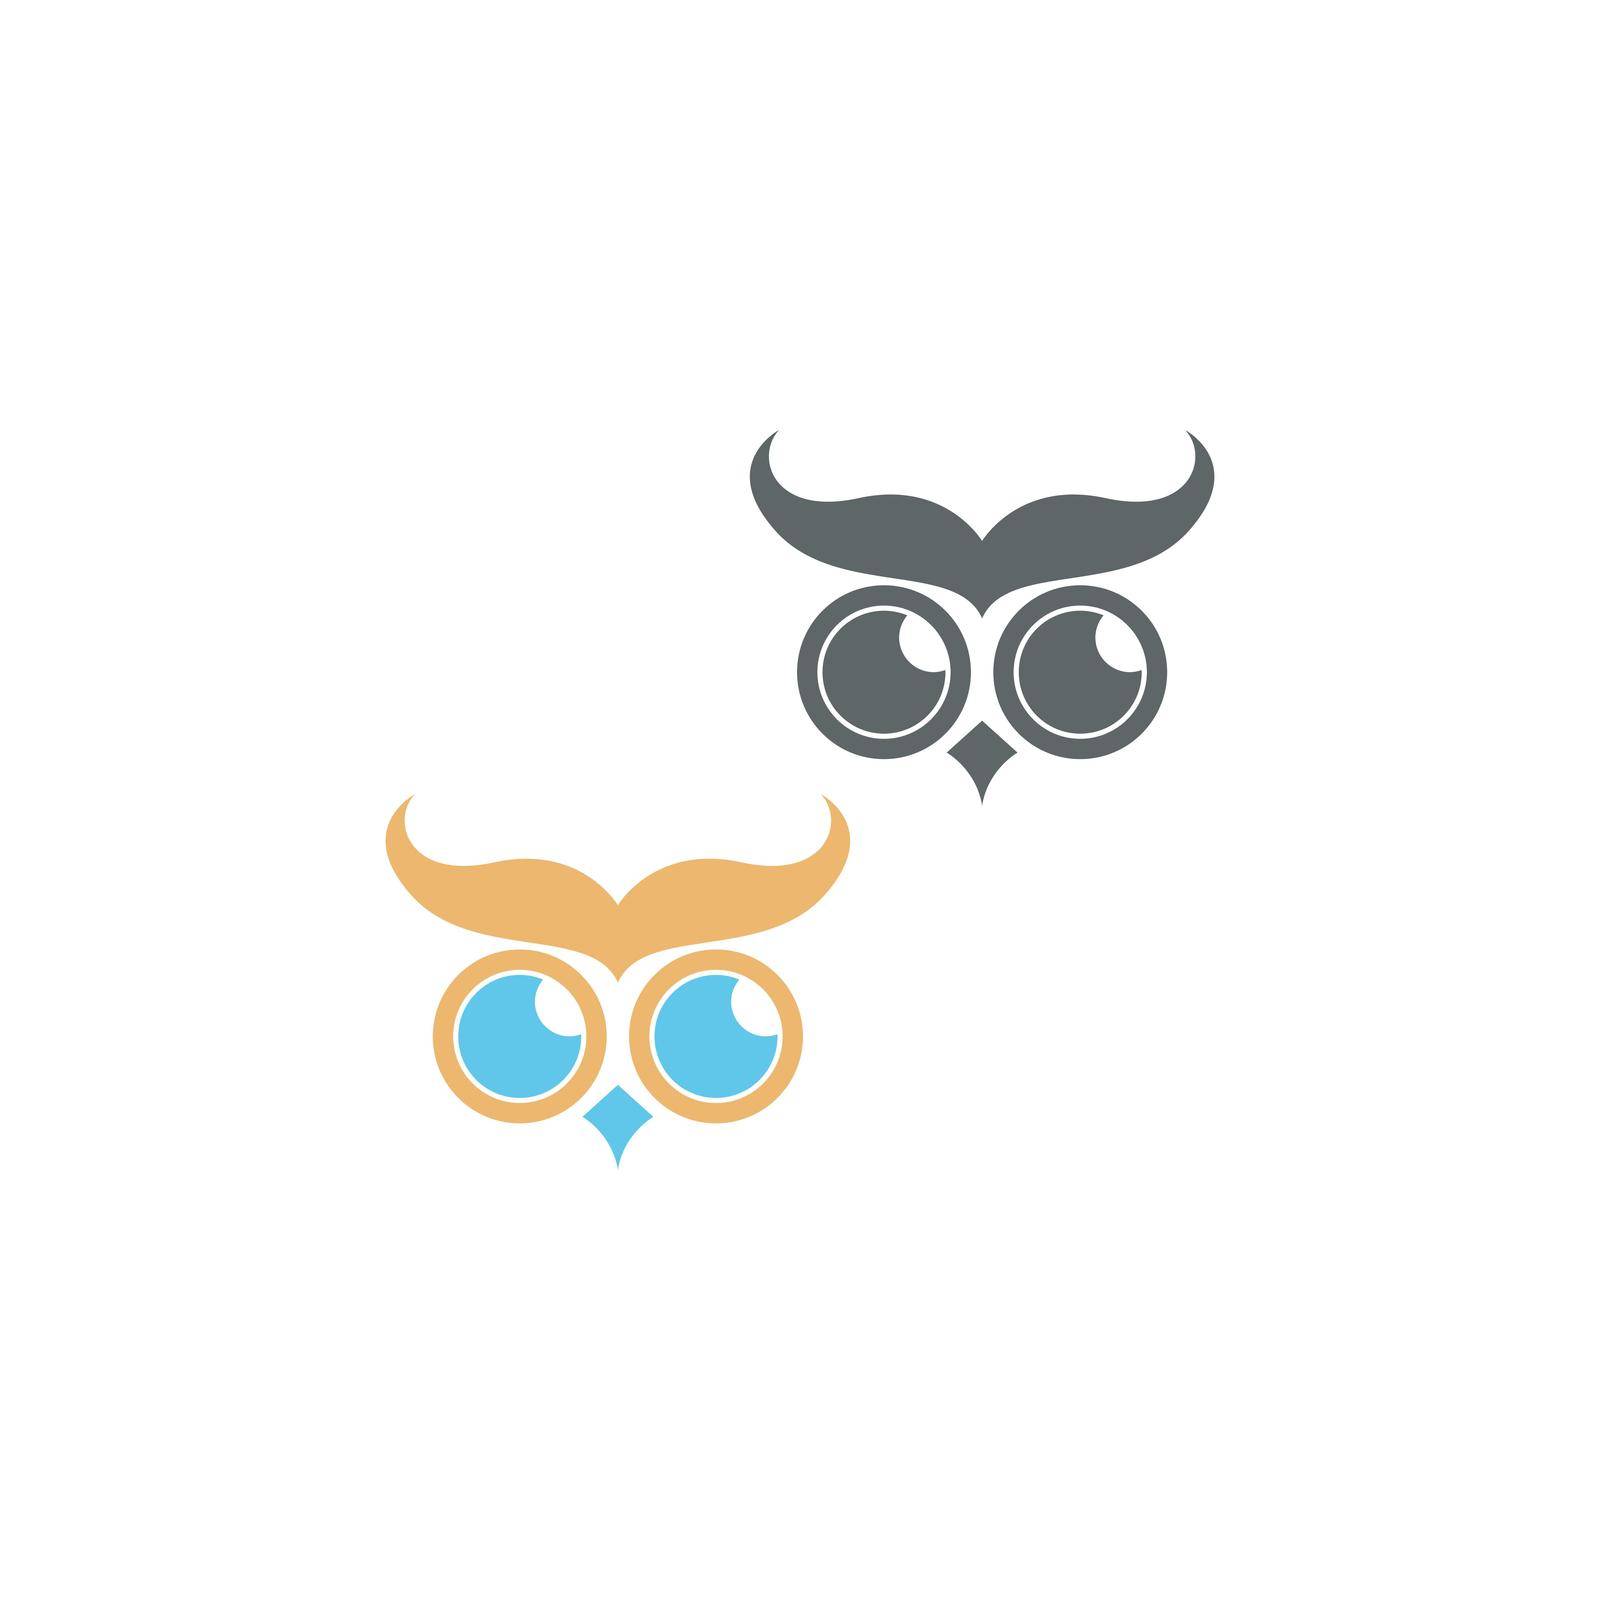 Owl icon logo design vector template by bellaxbudhong3